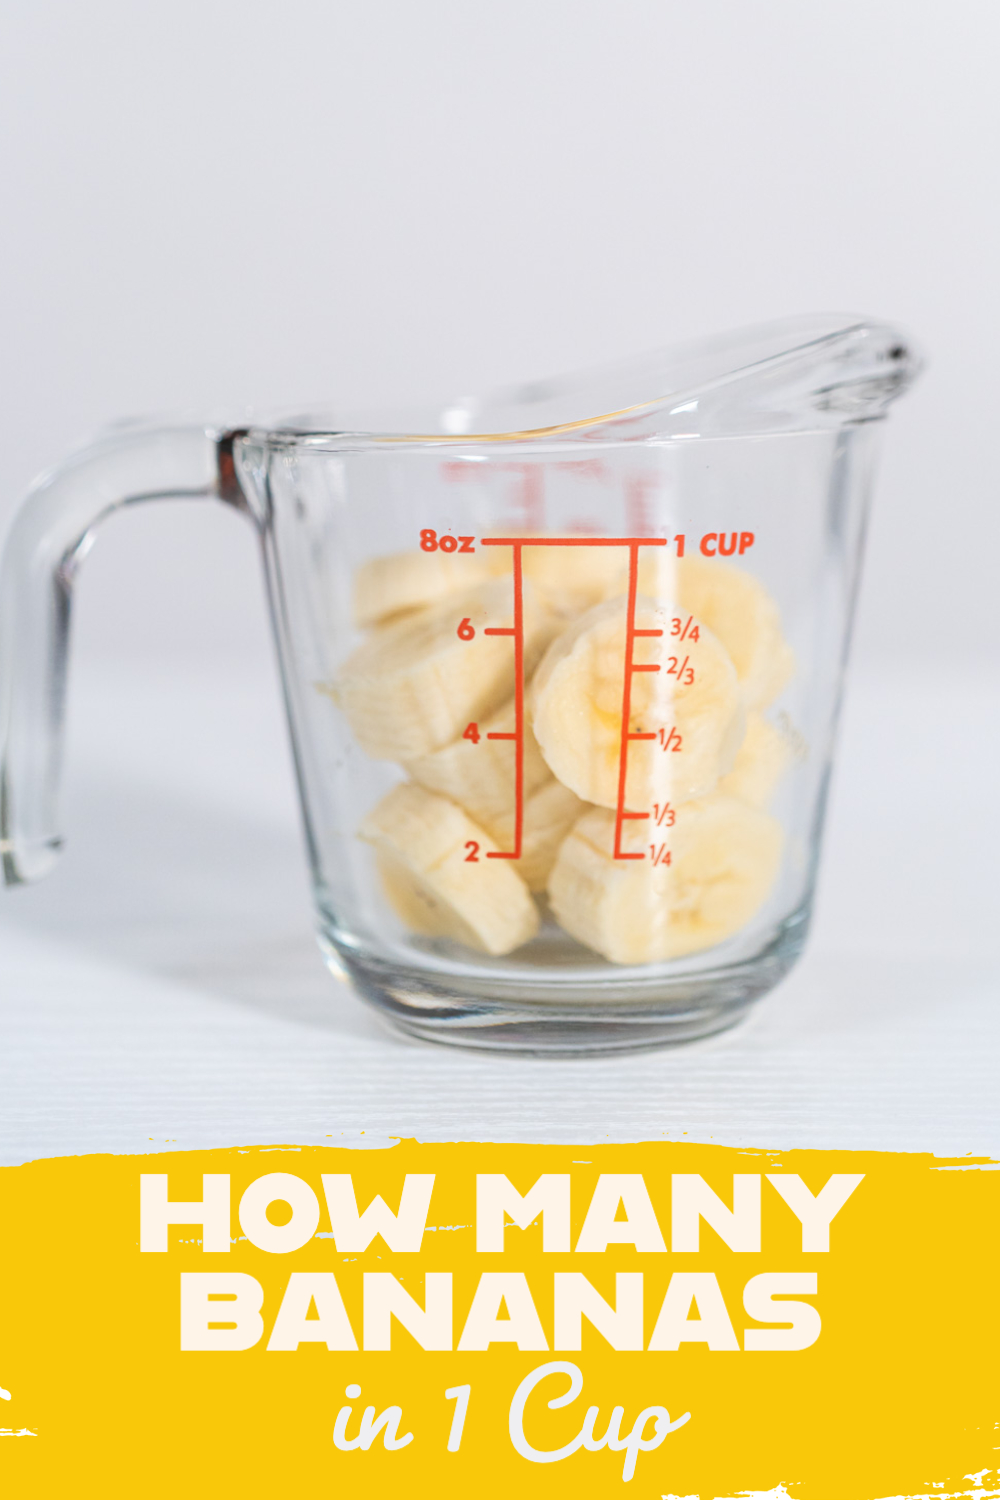 How Many Bananas in 1 Cup